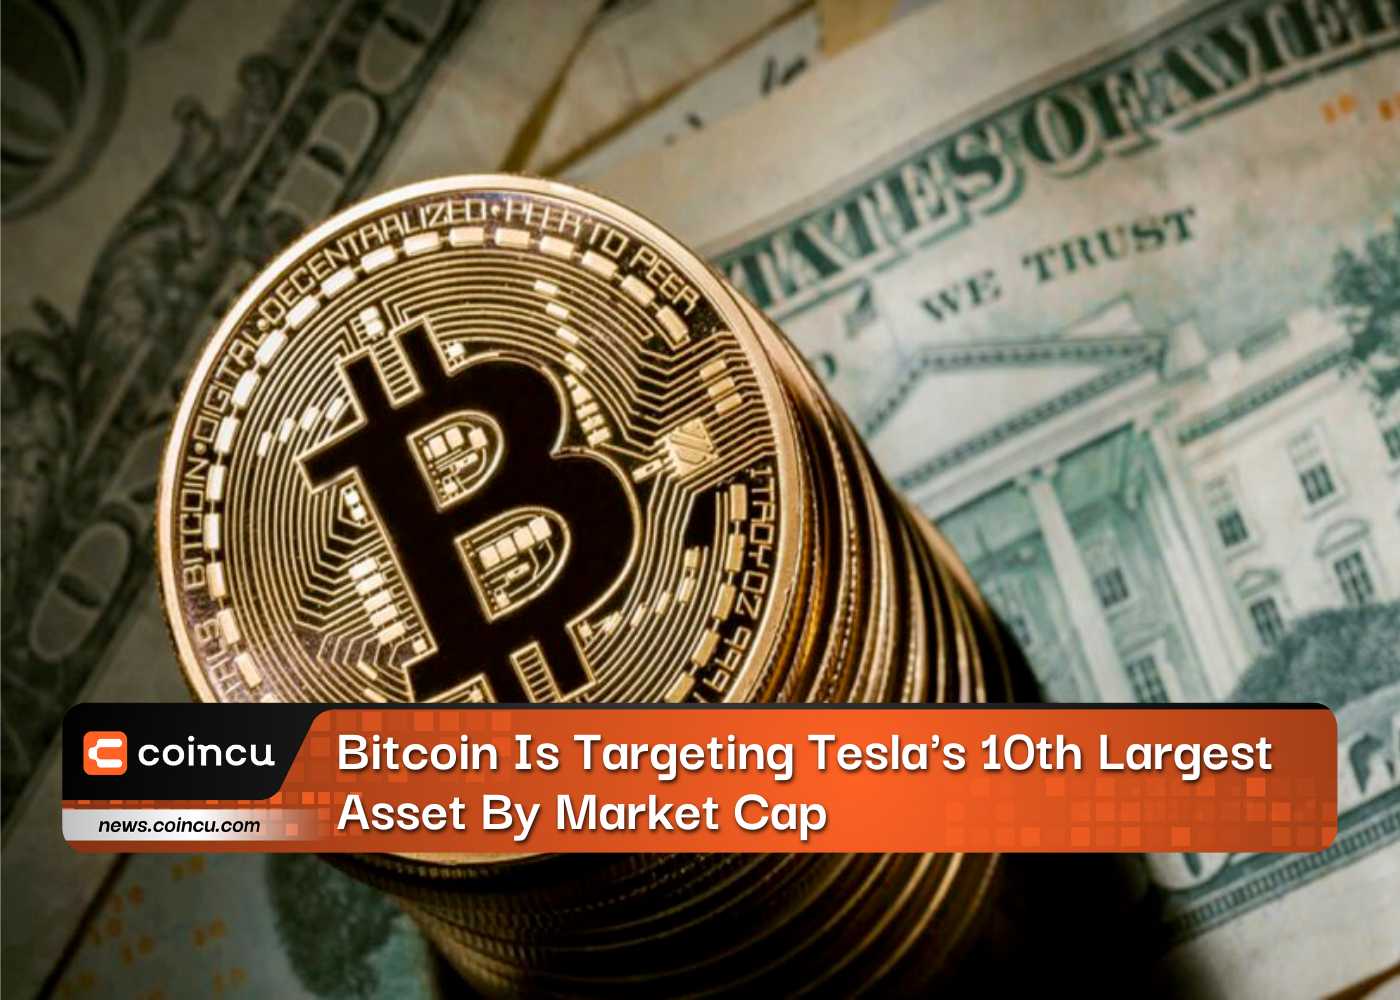 Bitcoin Is Targeting Tesla's 10th Largest Asset By Market Cap